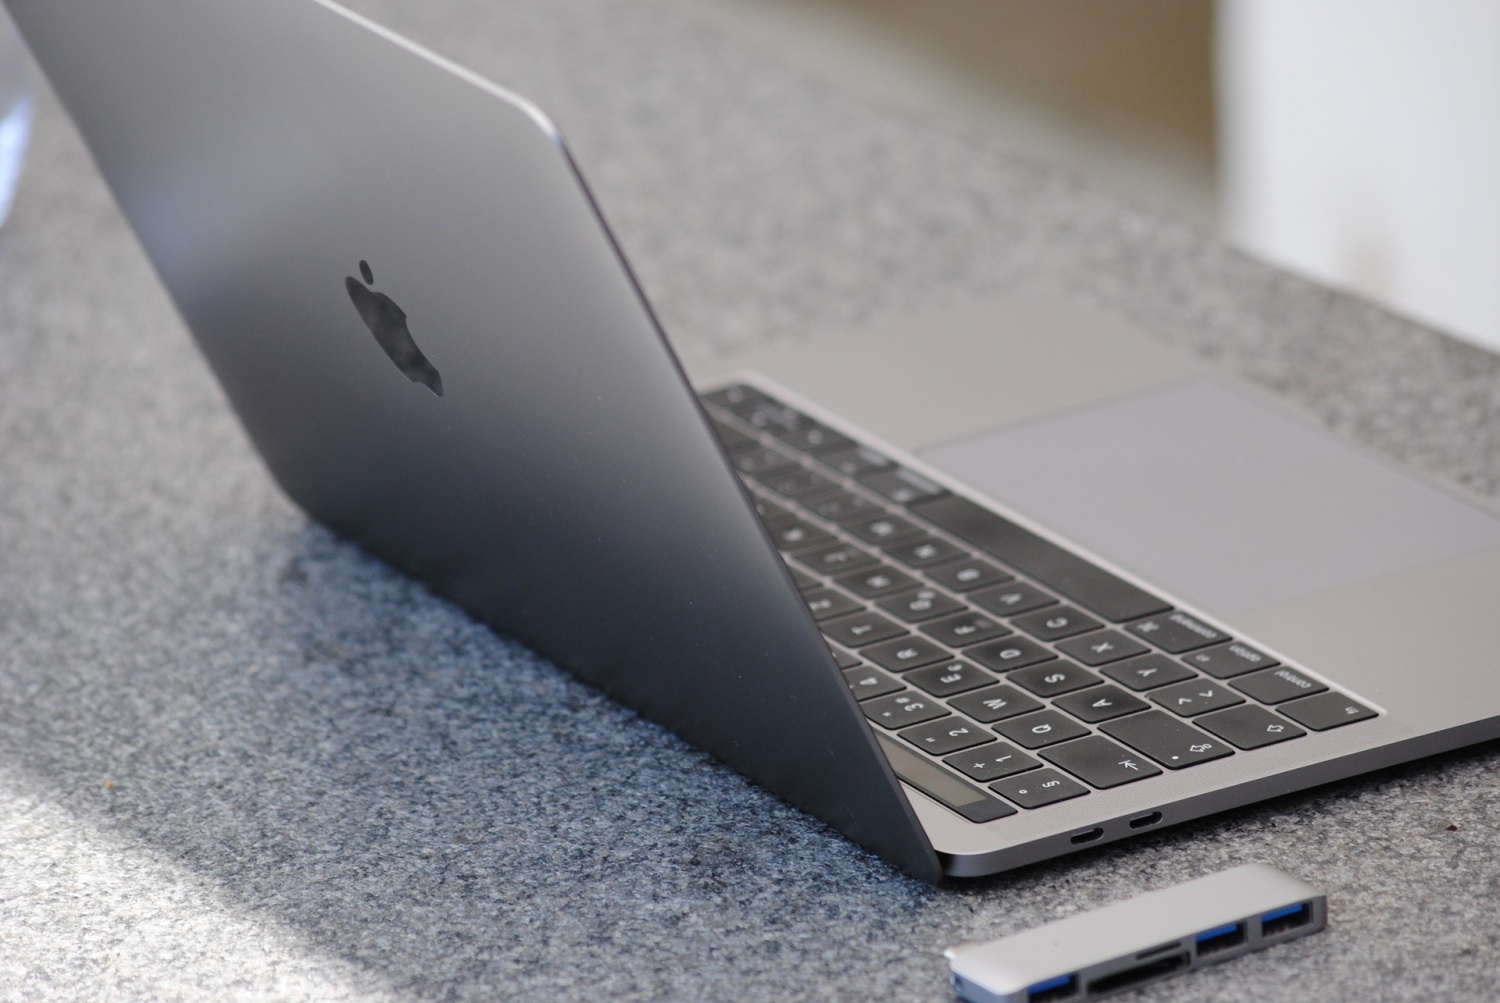 MacBook Pro M1 2021 Redesign Leaks 5 Reasons Why You Should Wait for